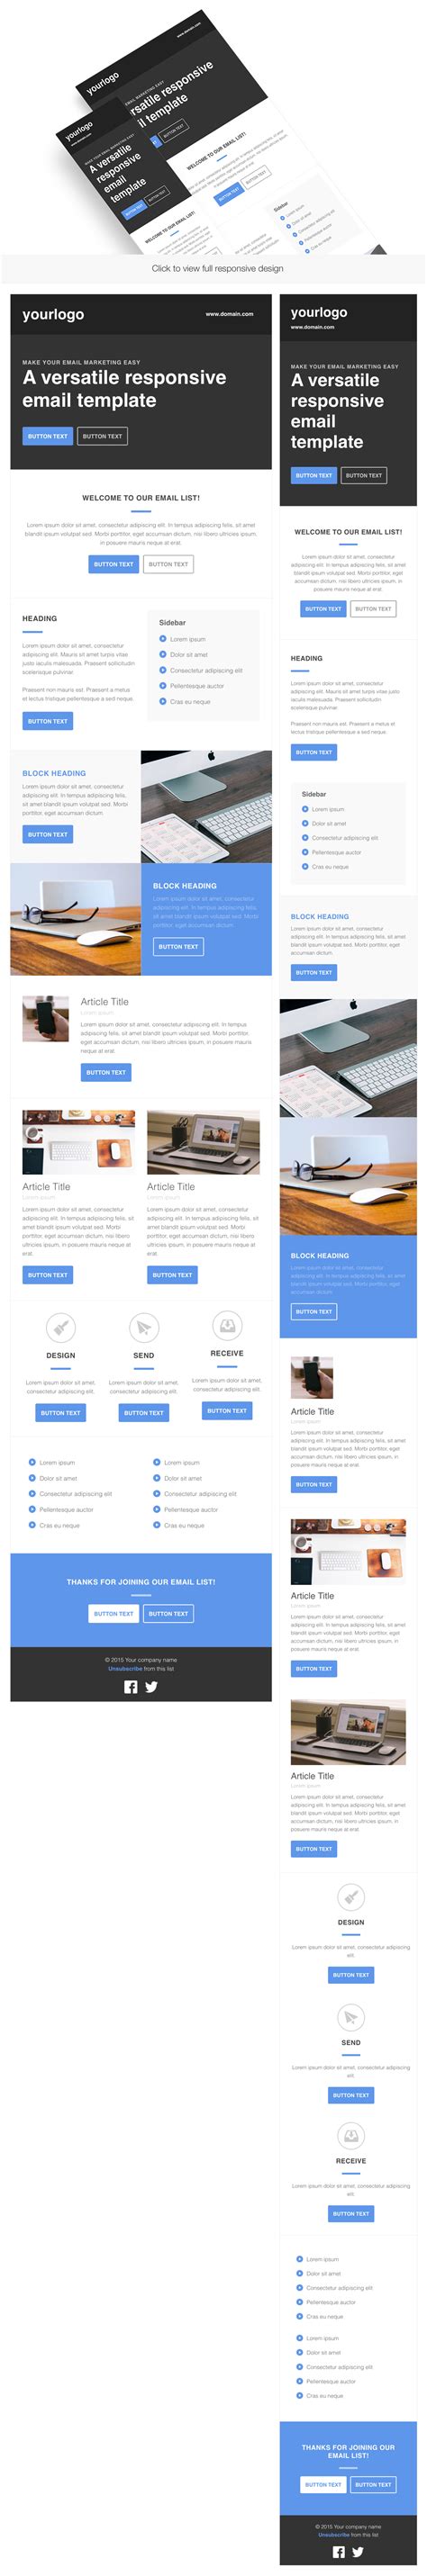 Responsive HTML Email Template | Html email templates, Email templates, Html email